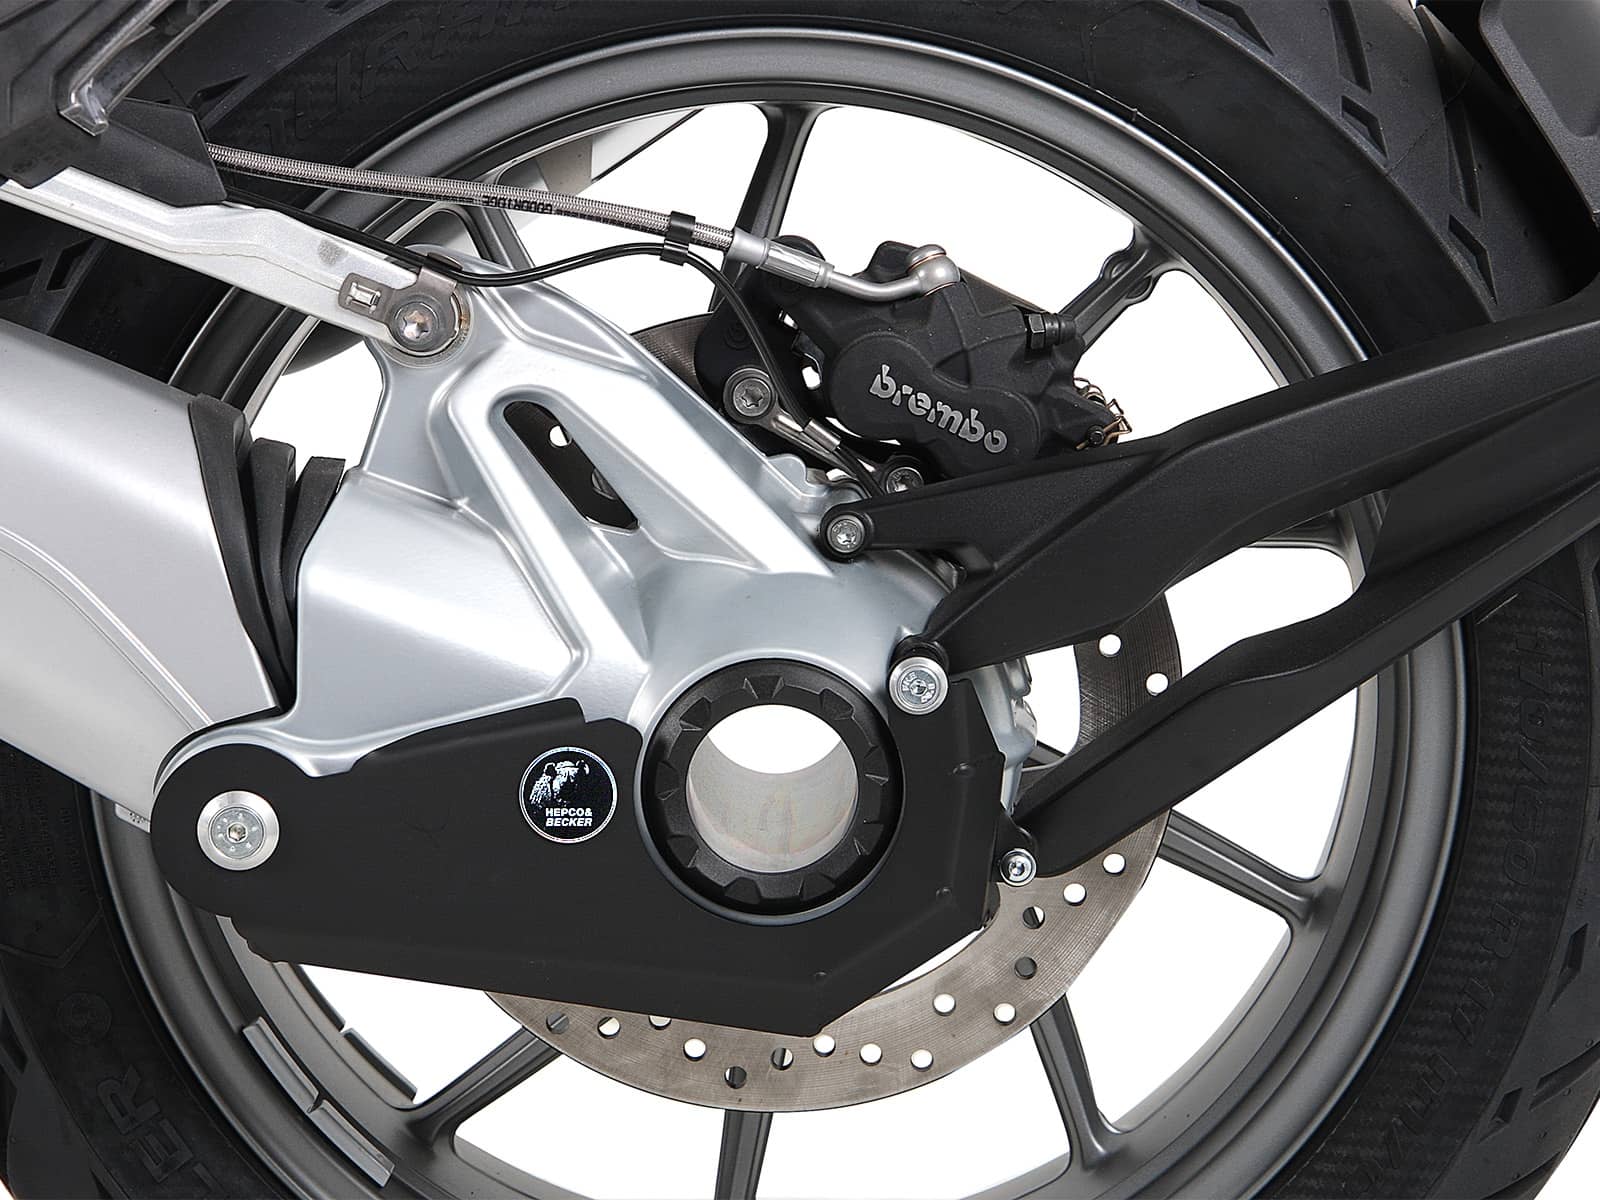 Kardan Protection for BMW R1250GS Adventure (2019-)